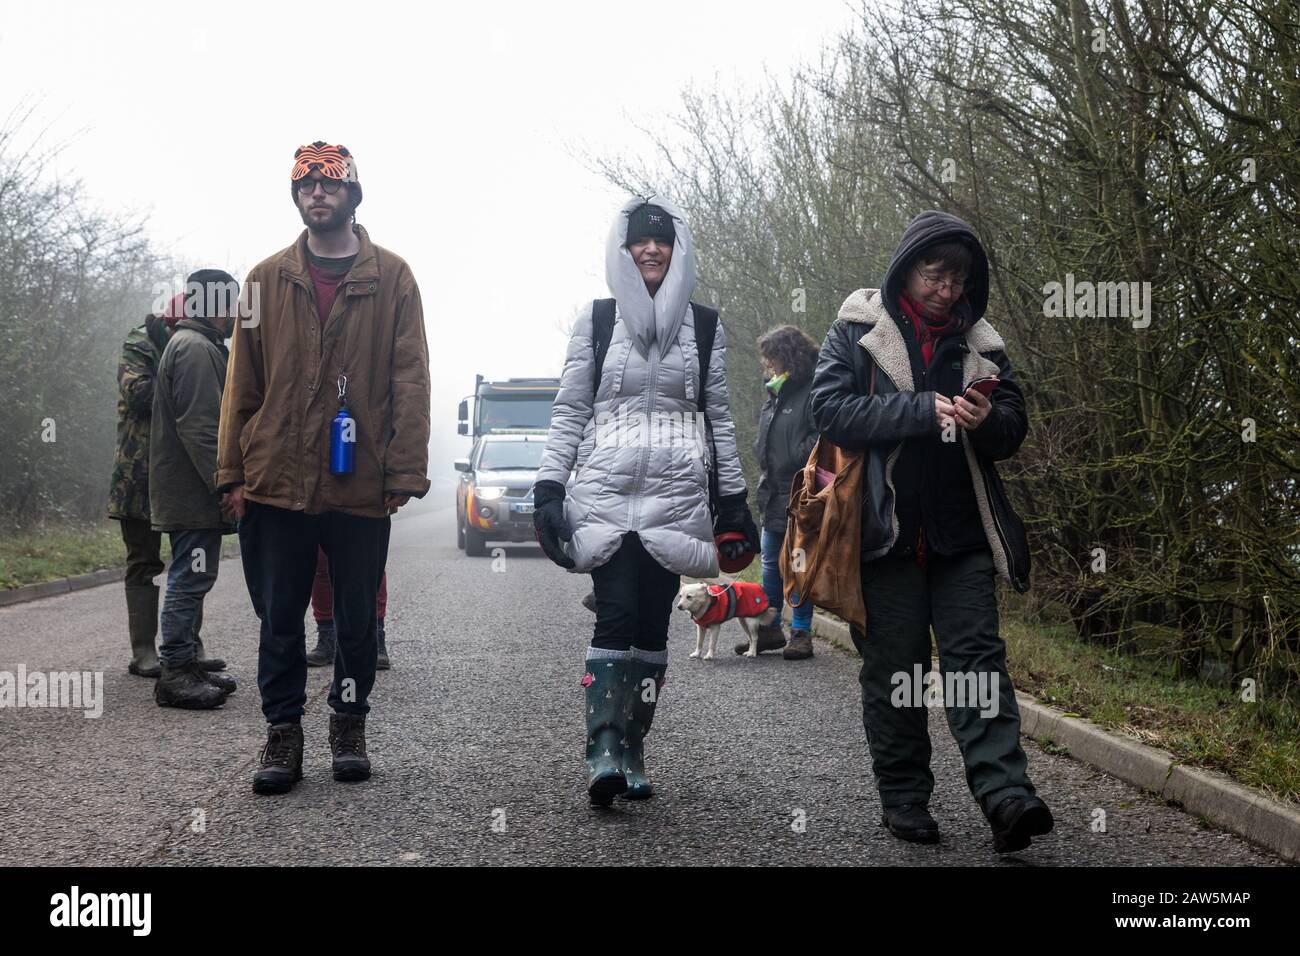 Denham, UK. 6 February, 2020. Environmental activists from Save the Colne Valley, Stop HS2 and Extinction Rebellion walk at a snail’s pace along a road in order to block a security vehicle and truck delivering fencing and other supplies to be used for works associated with the HS2 high-speed rail link close to the river Colne at Denham Ford. Works planned in the immediate vicinity include the felling of trees and the construction of a Bailey bridge, compounds and fencing, some of which in a wetland nature reserve forming part of a Site of Metropolitan Importance for Nature Conservation (SMI). Stock Photo